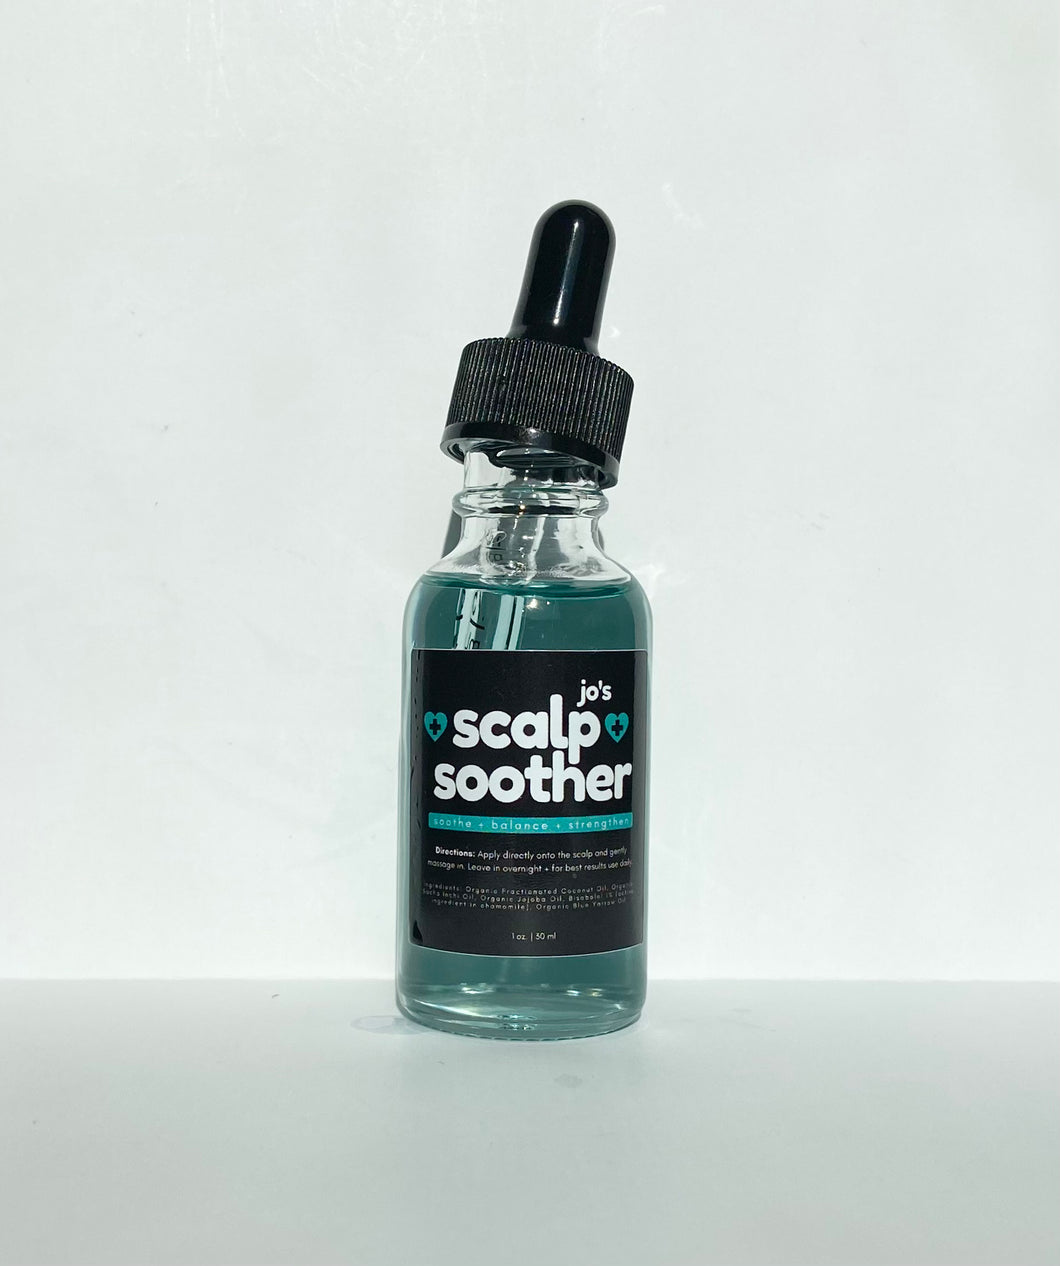 Jo’s Scalp Soother Serum